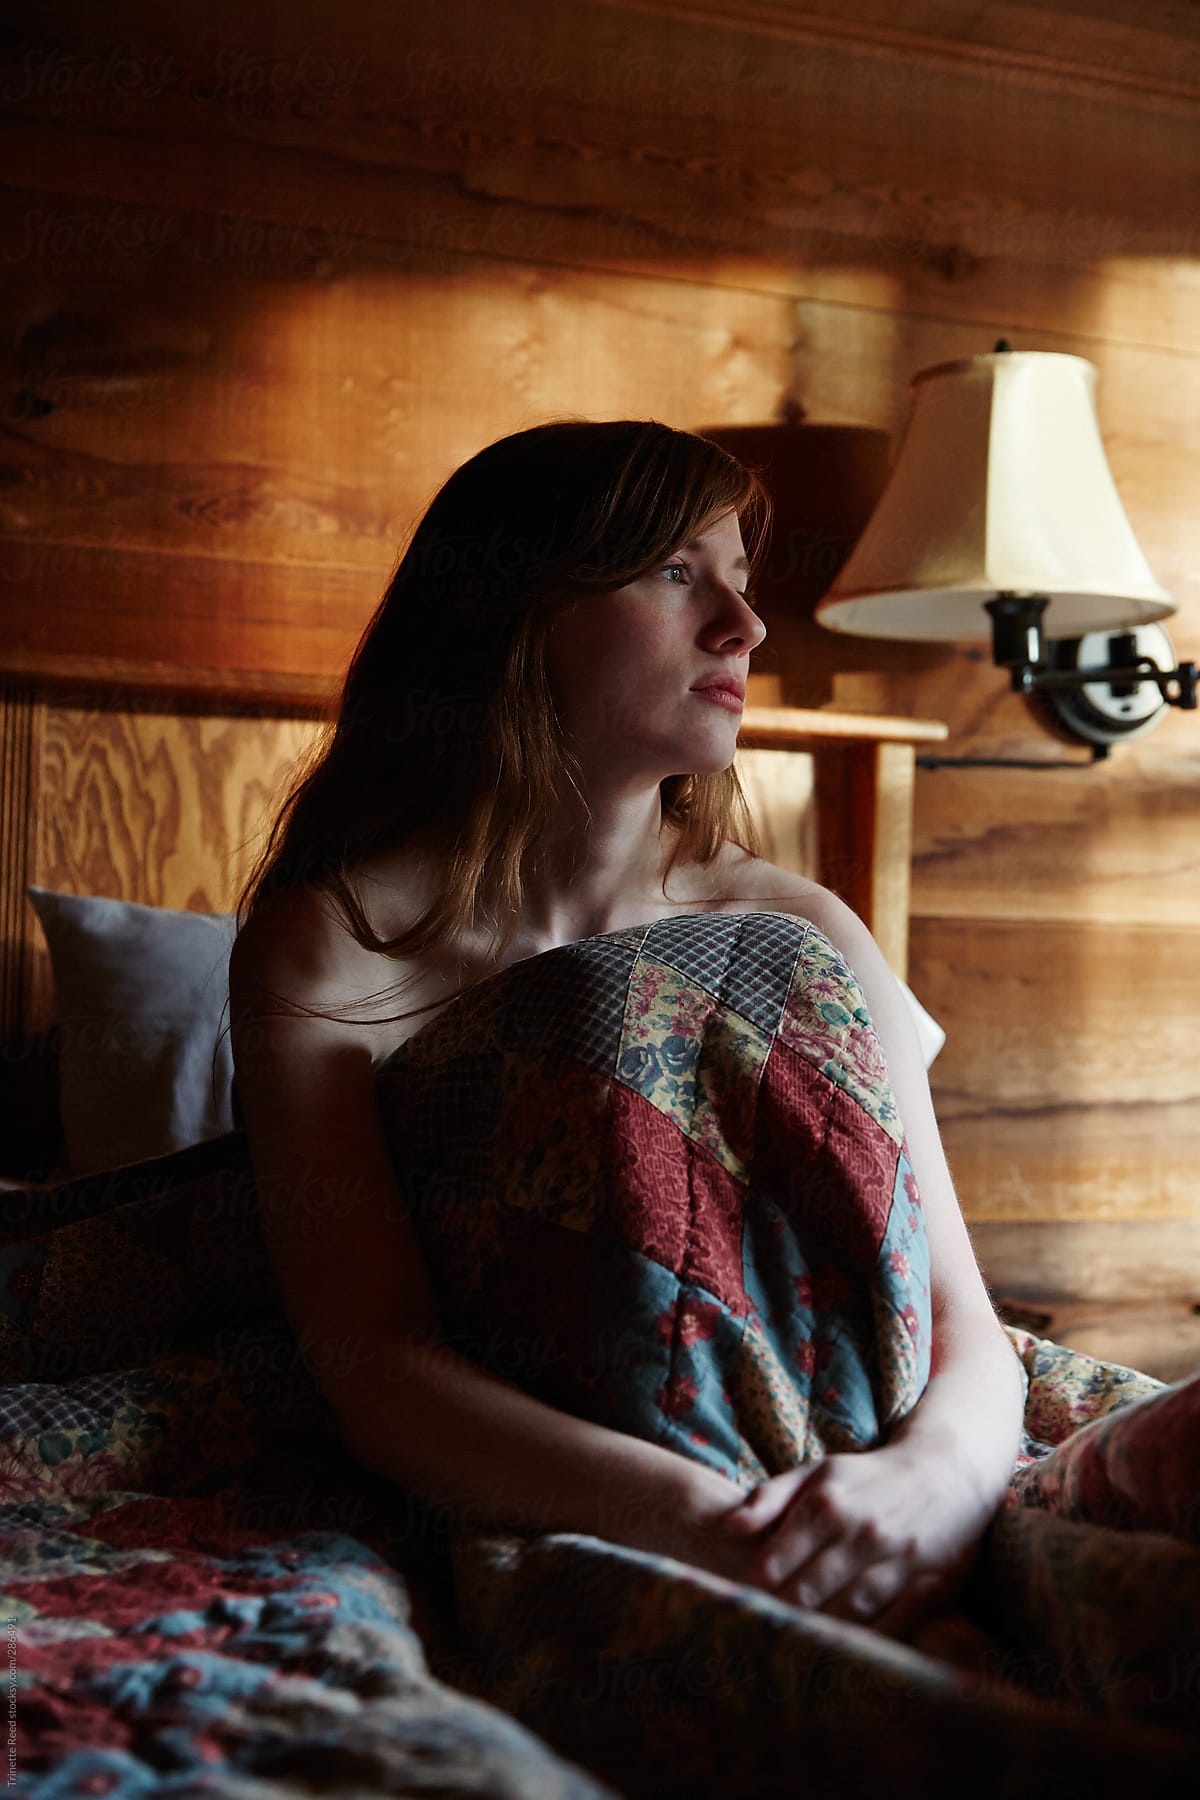 Sad woman sitting on bed in rustic log cabin thinking